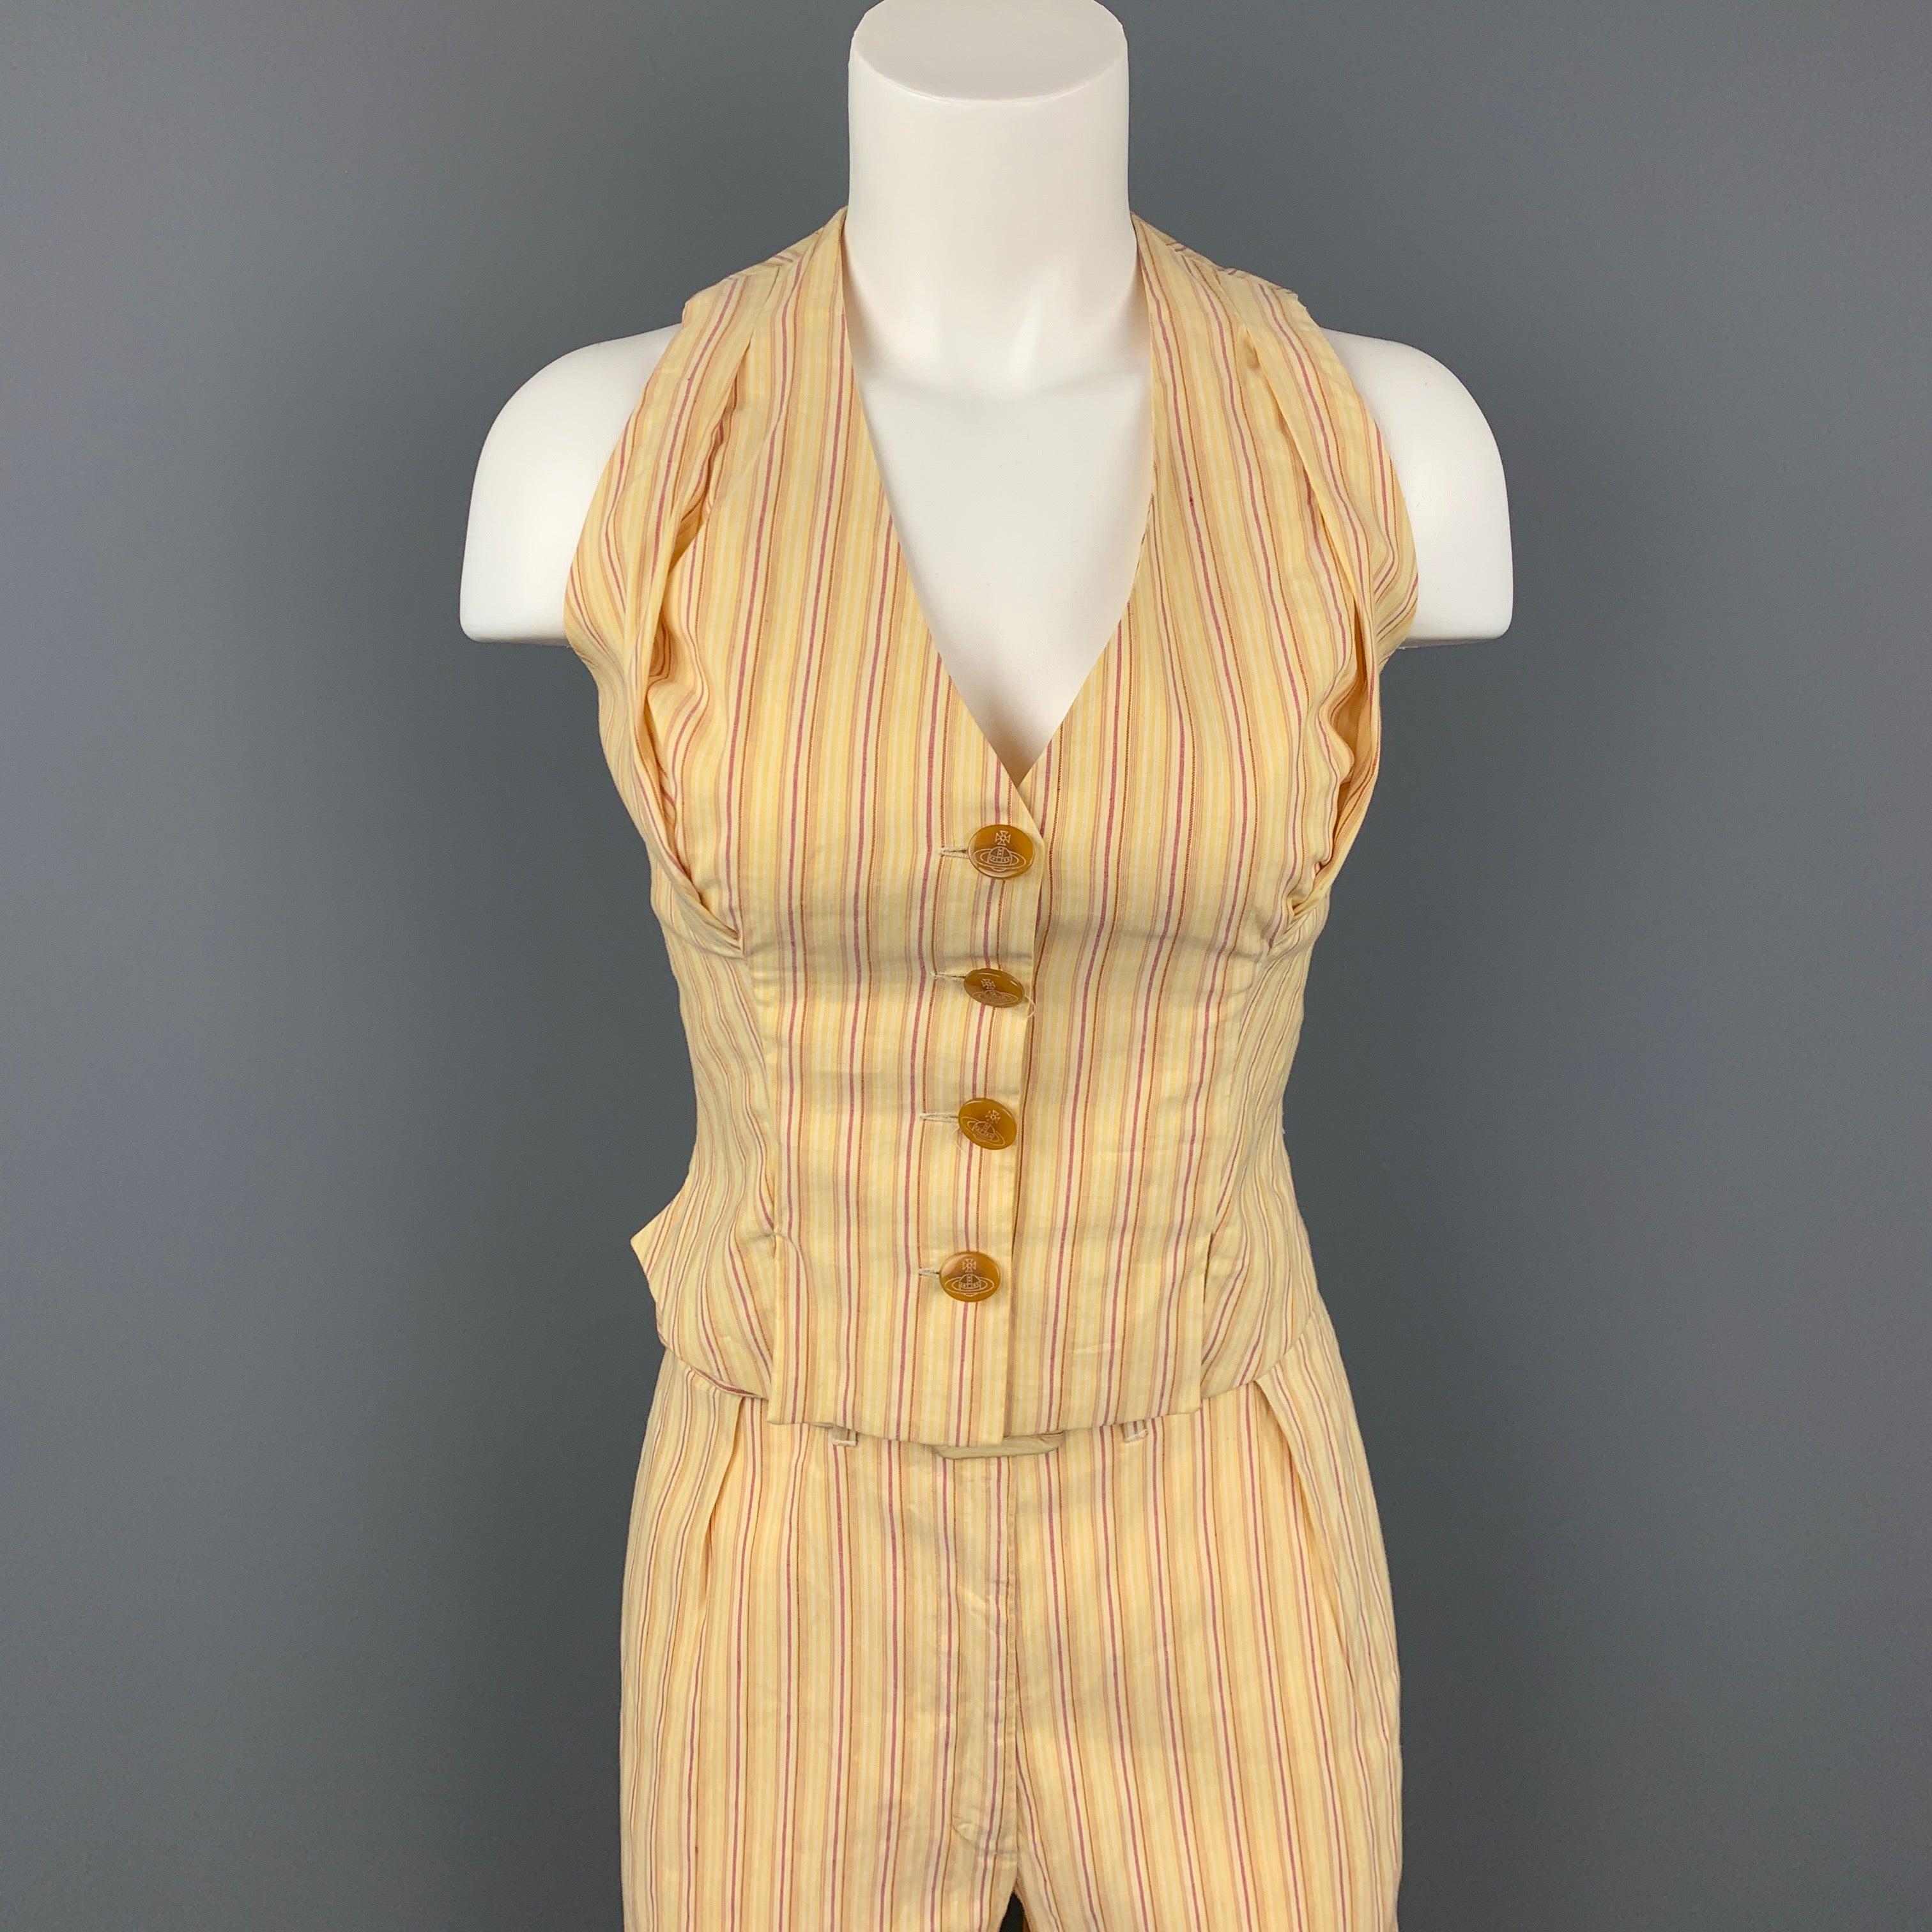 VIVIENNE WESTWOOD Spring 1995 vest and pant set comes in a yellow & red stripe linen with a full liner featuring a pleated design, front slits, cropped back, buttoned closure, and includes matching belted pants. Moderate wear. Made in Italy.
Very